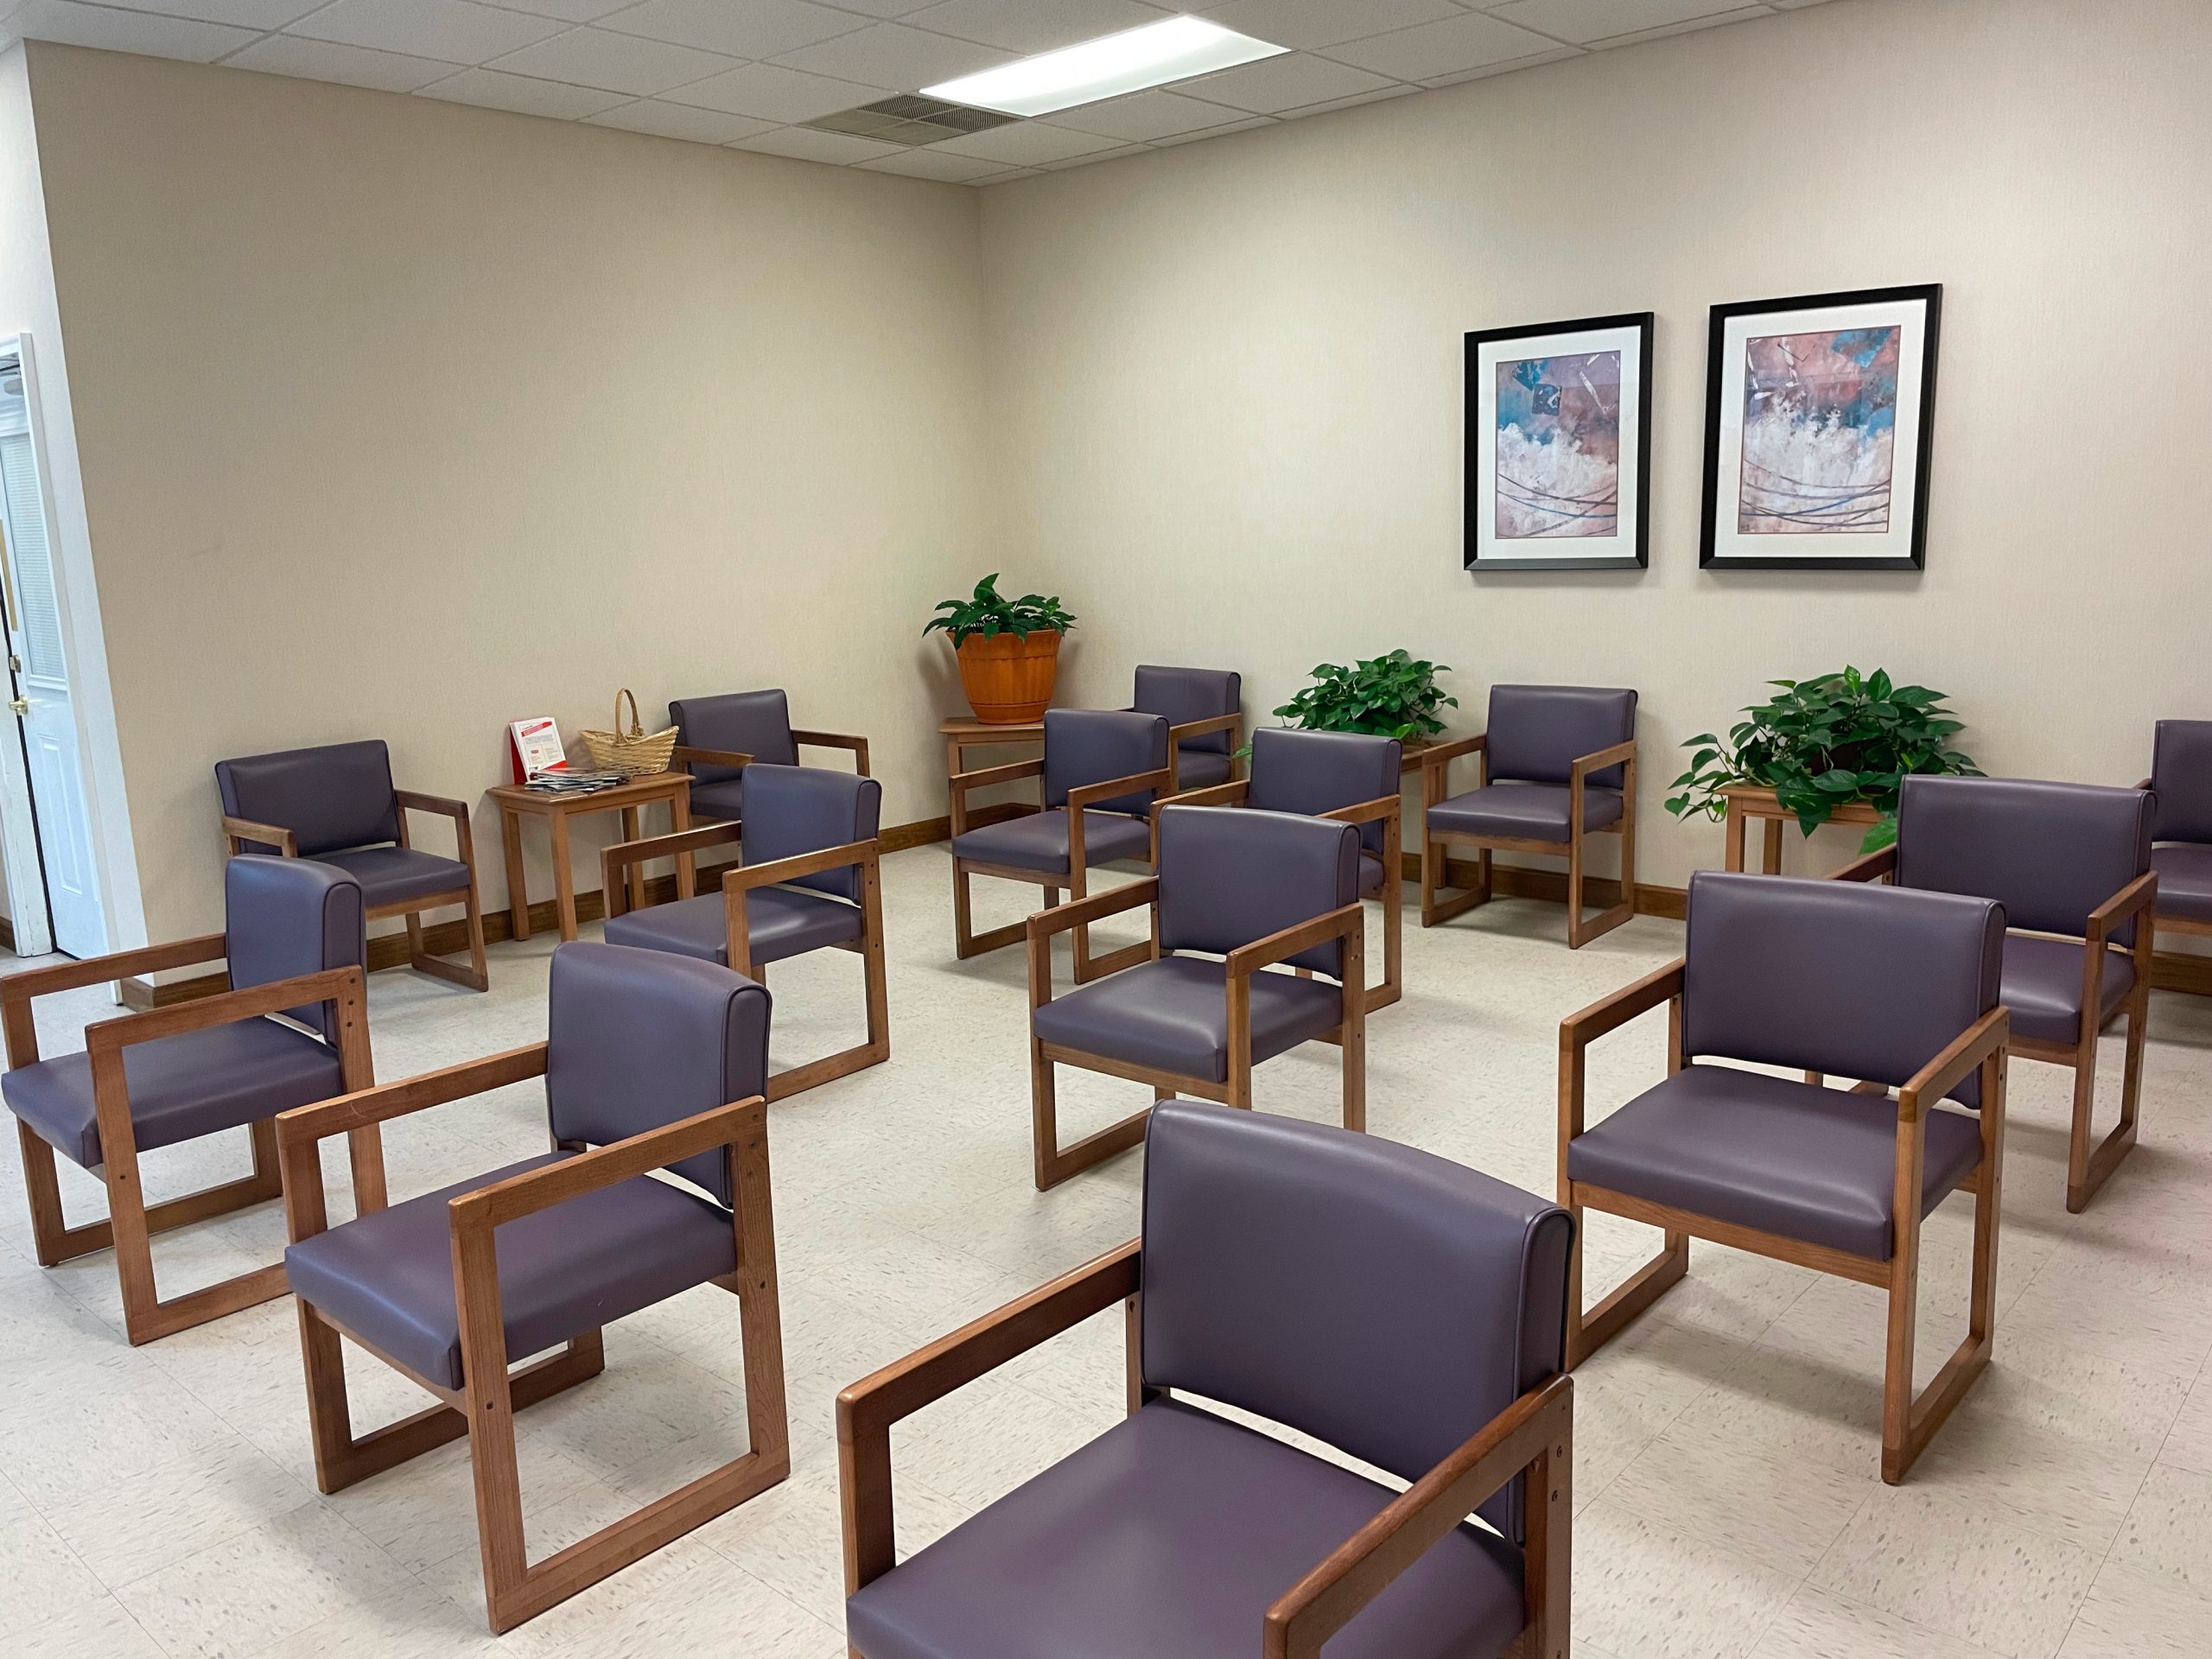 waiting room with empty chairs